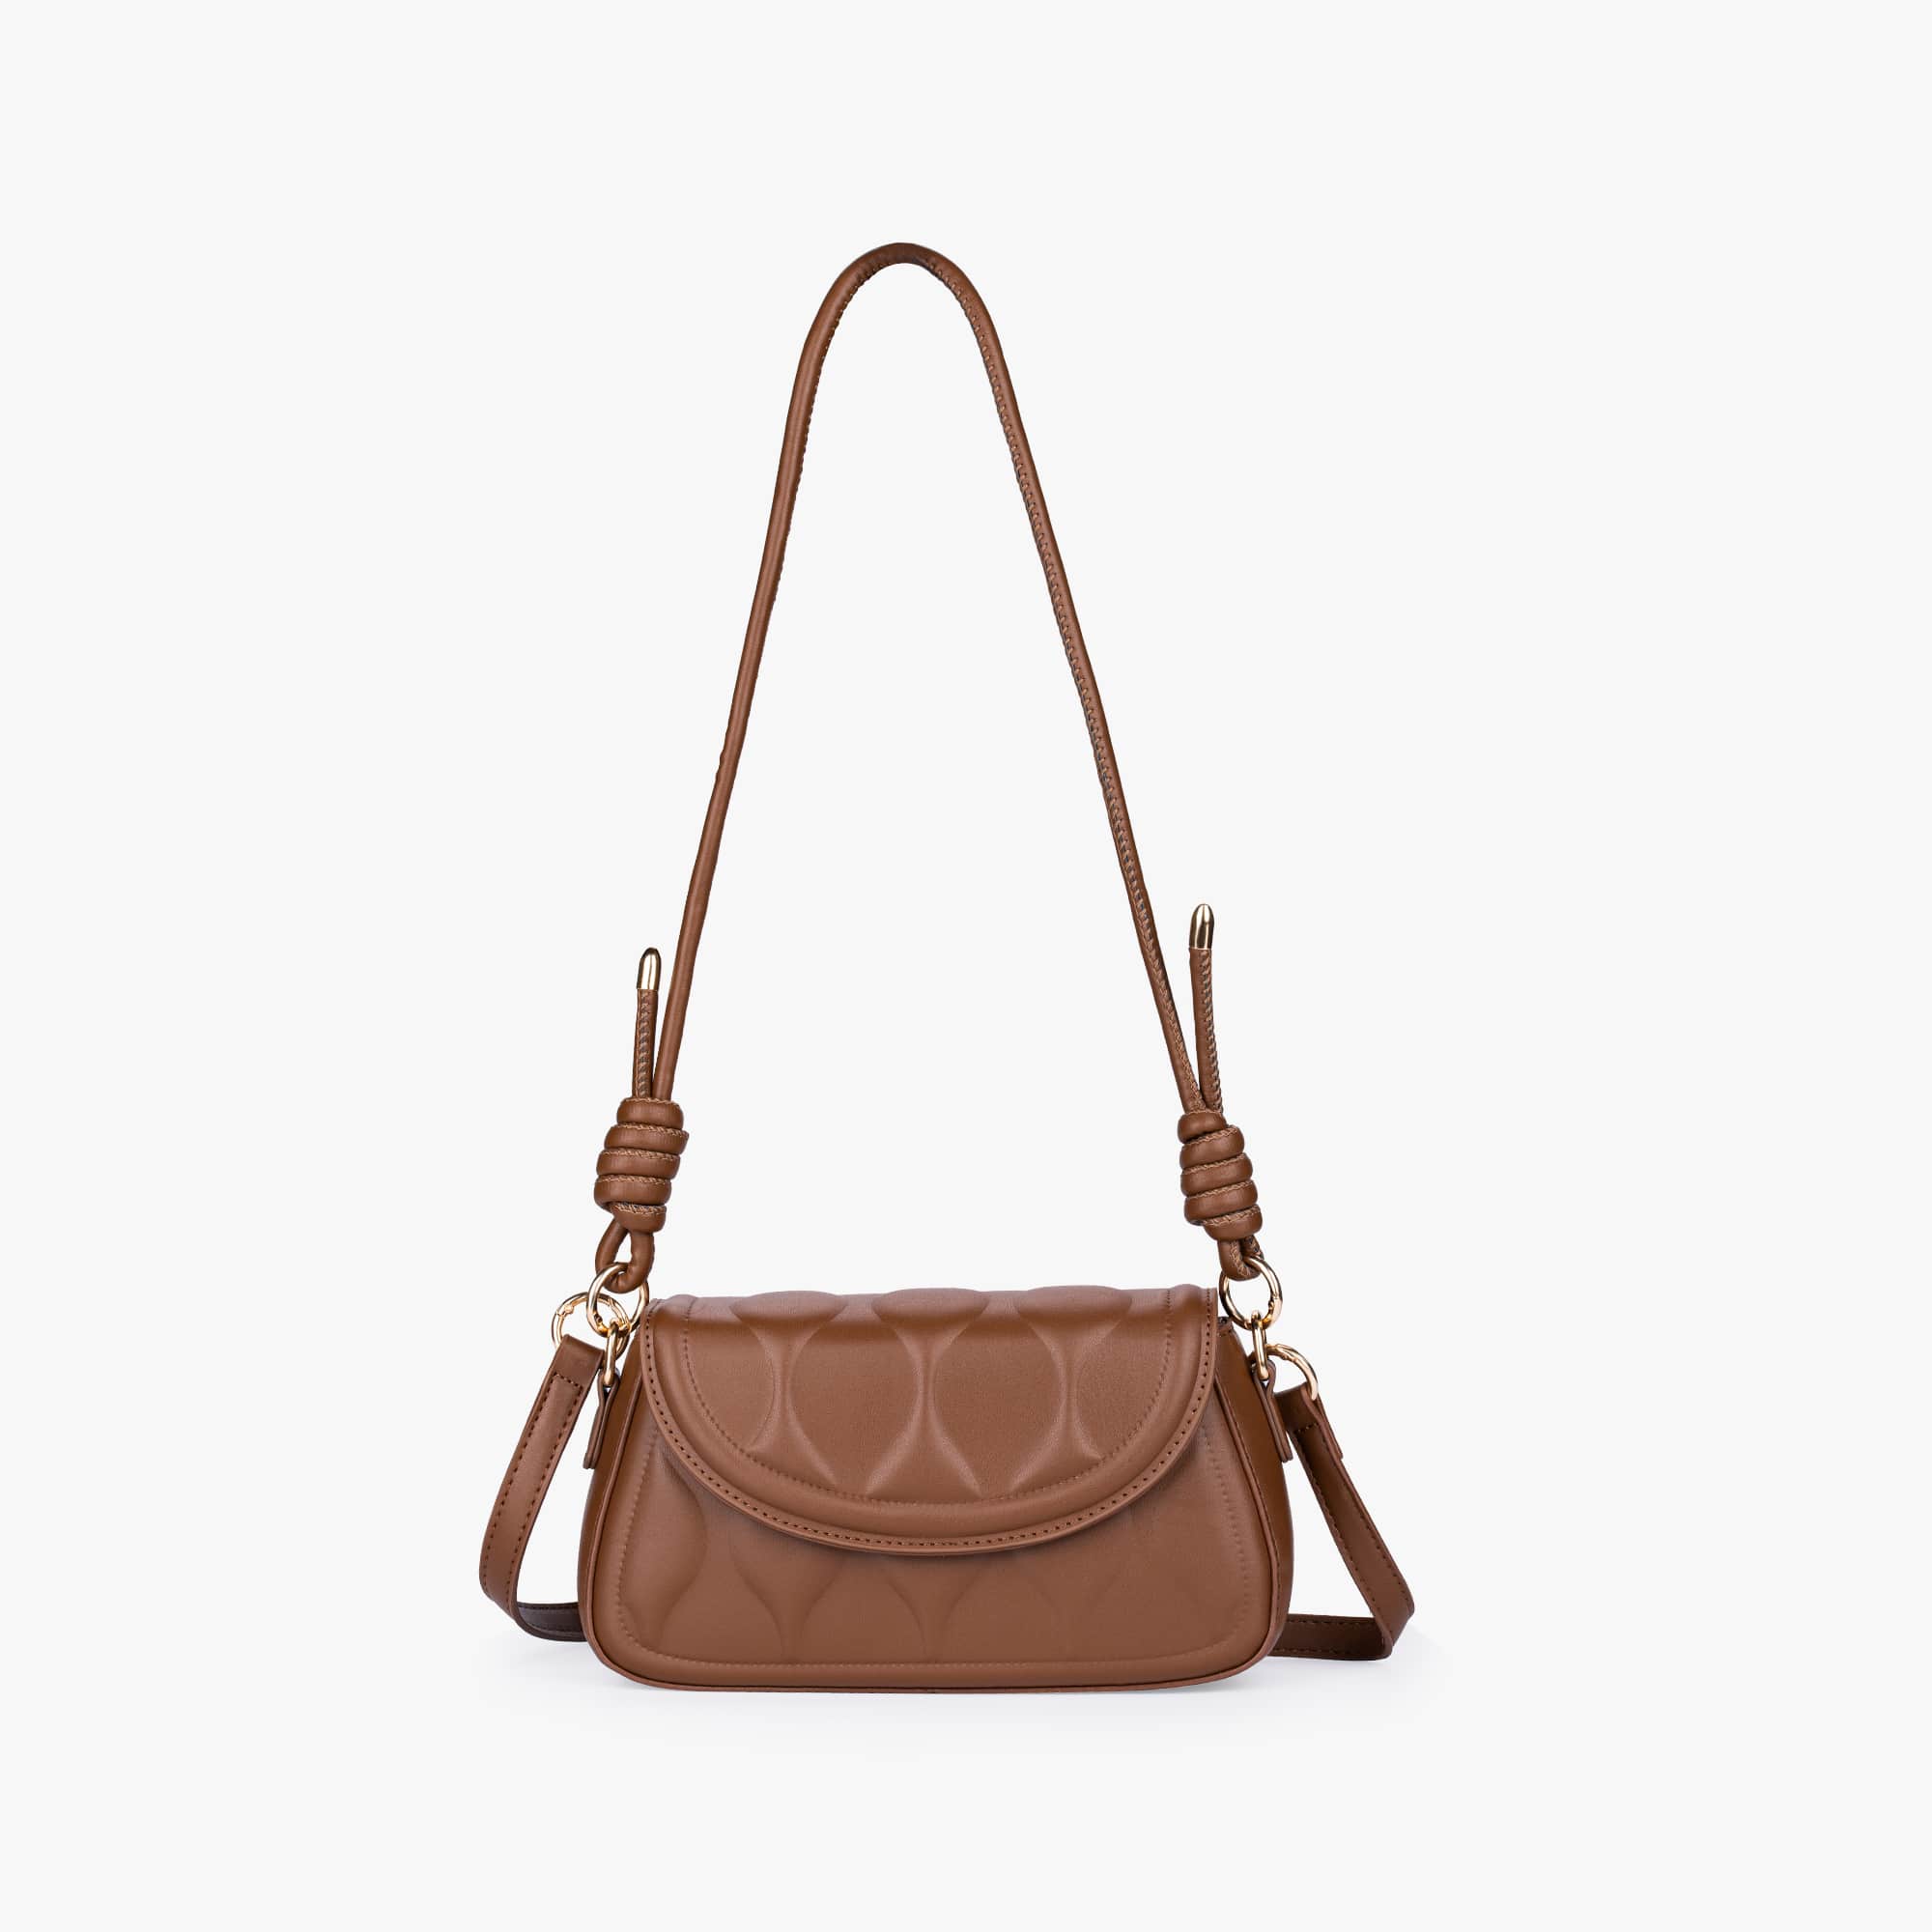 THE TIMELESS CARAMEL IN 22CM PU LEATHER MADE! Crossbody or Shoulder ba